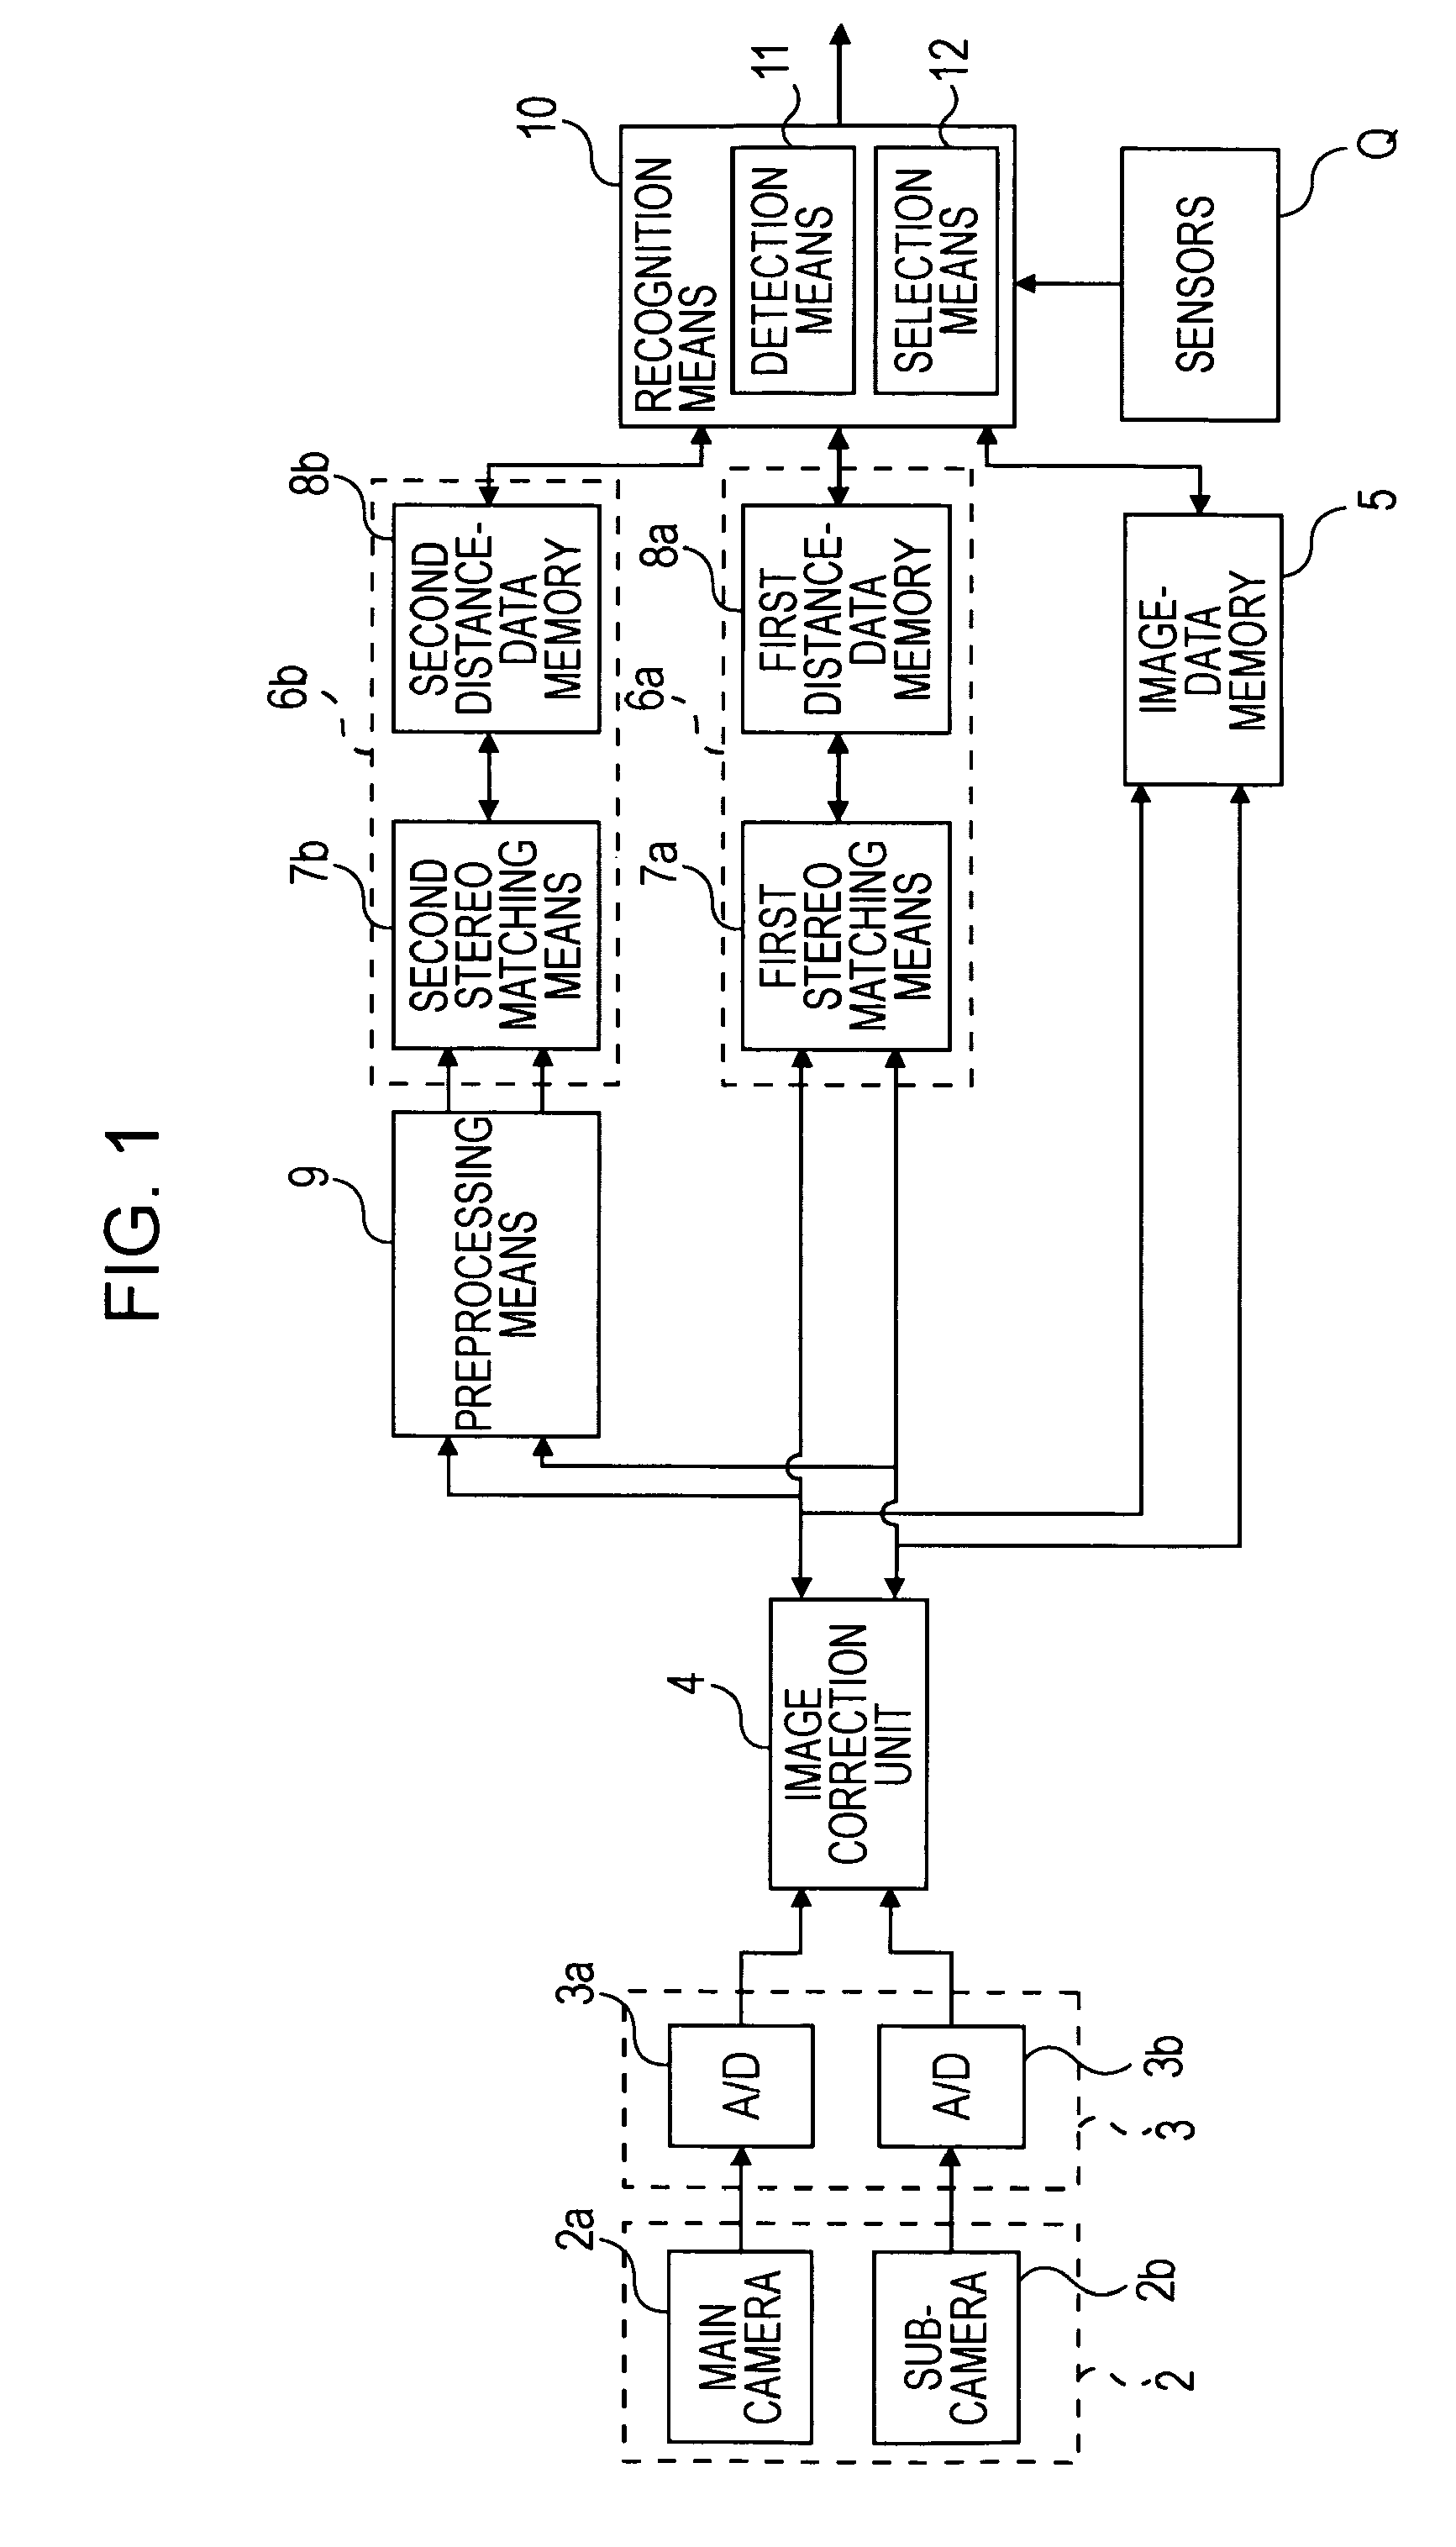 Vehicle environment recognition system